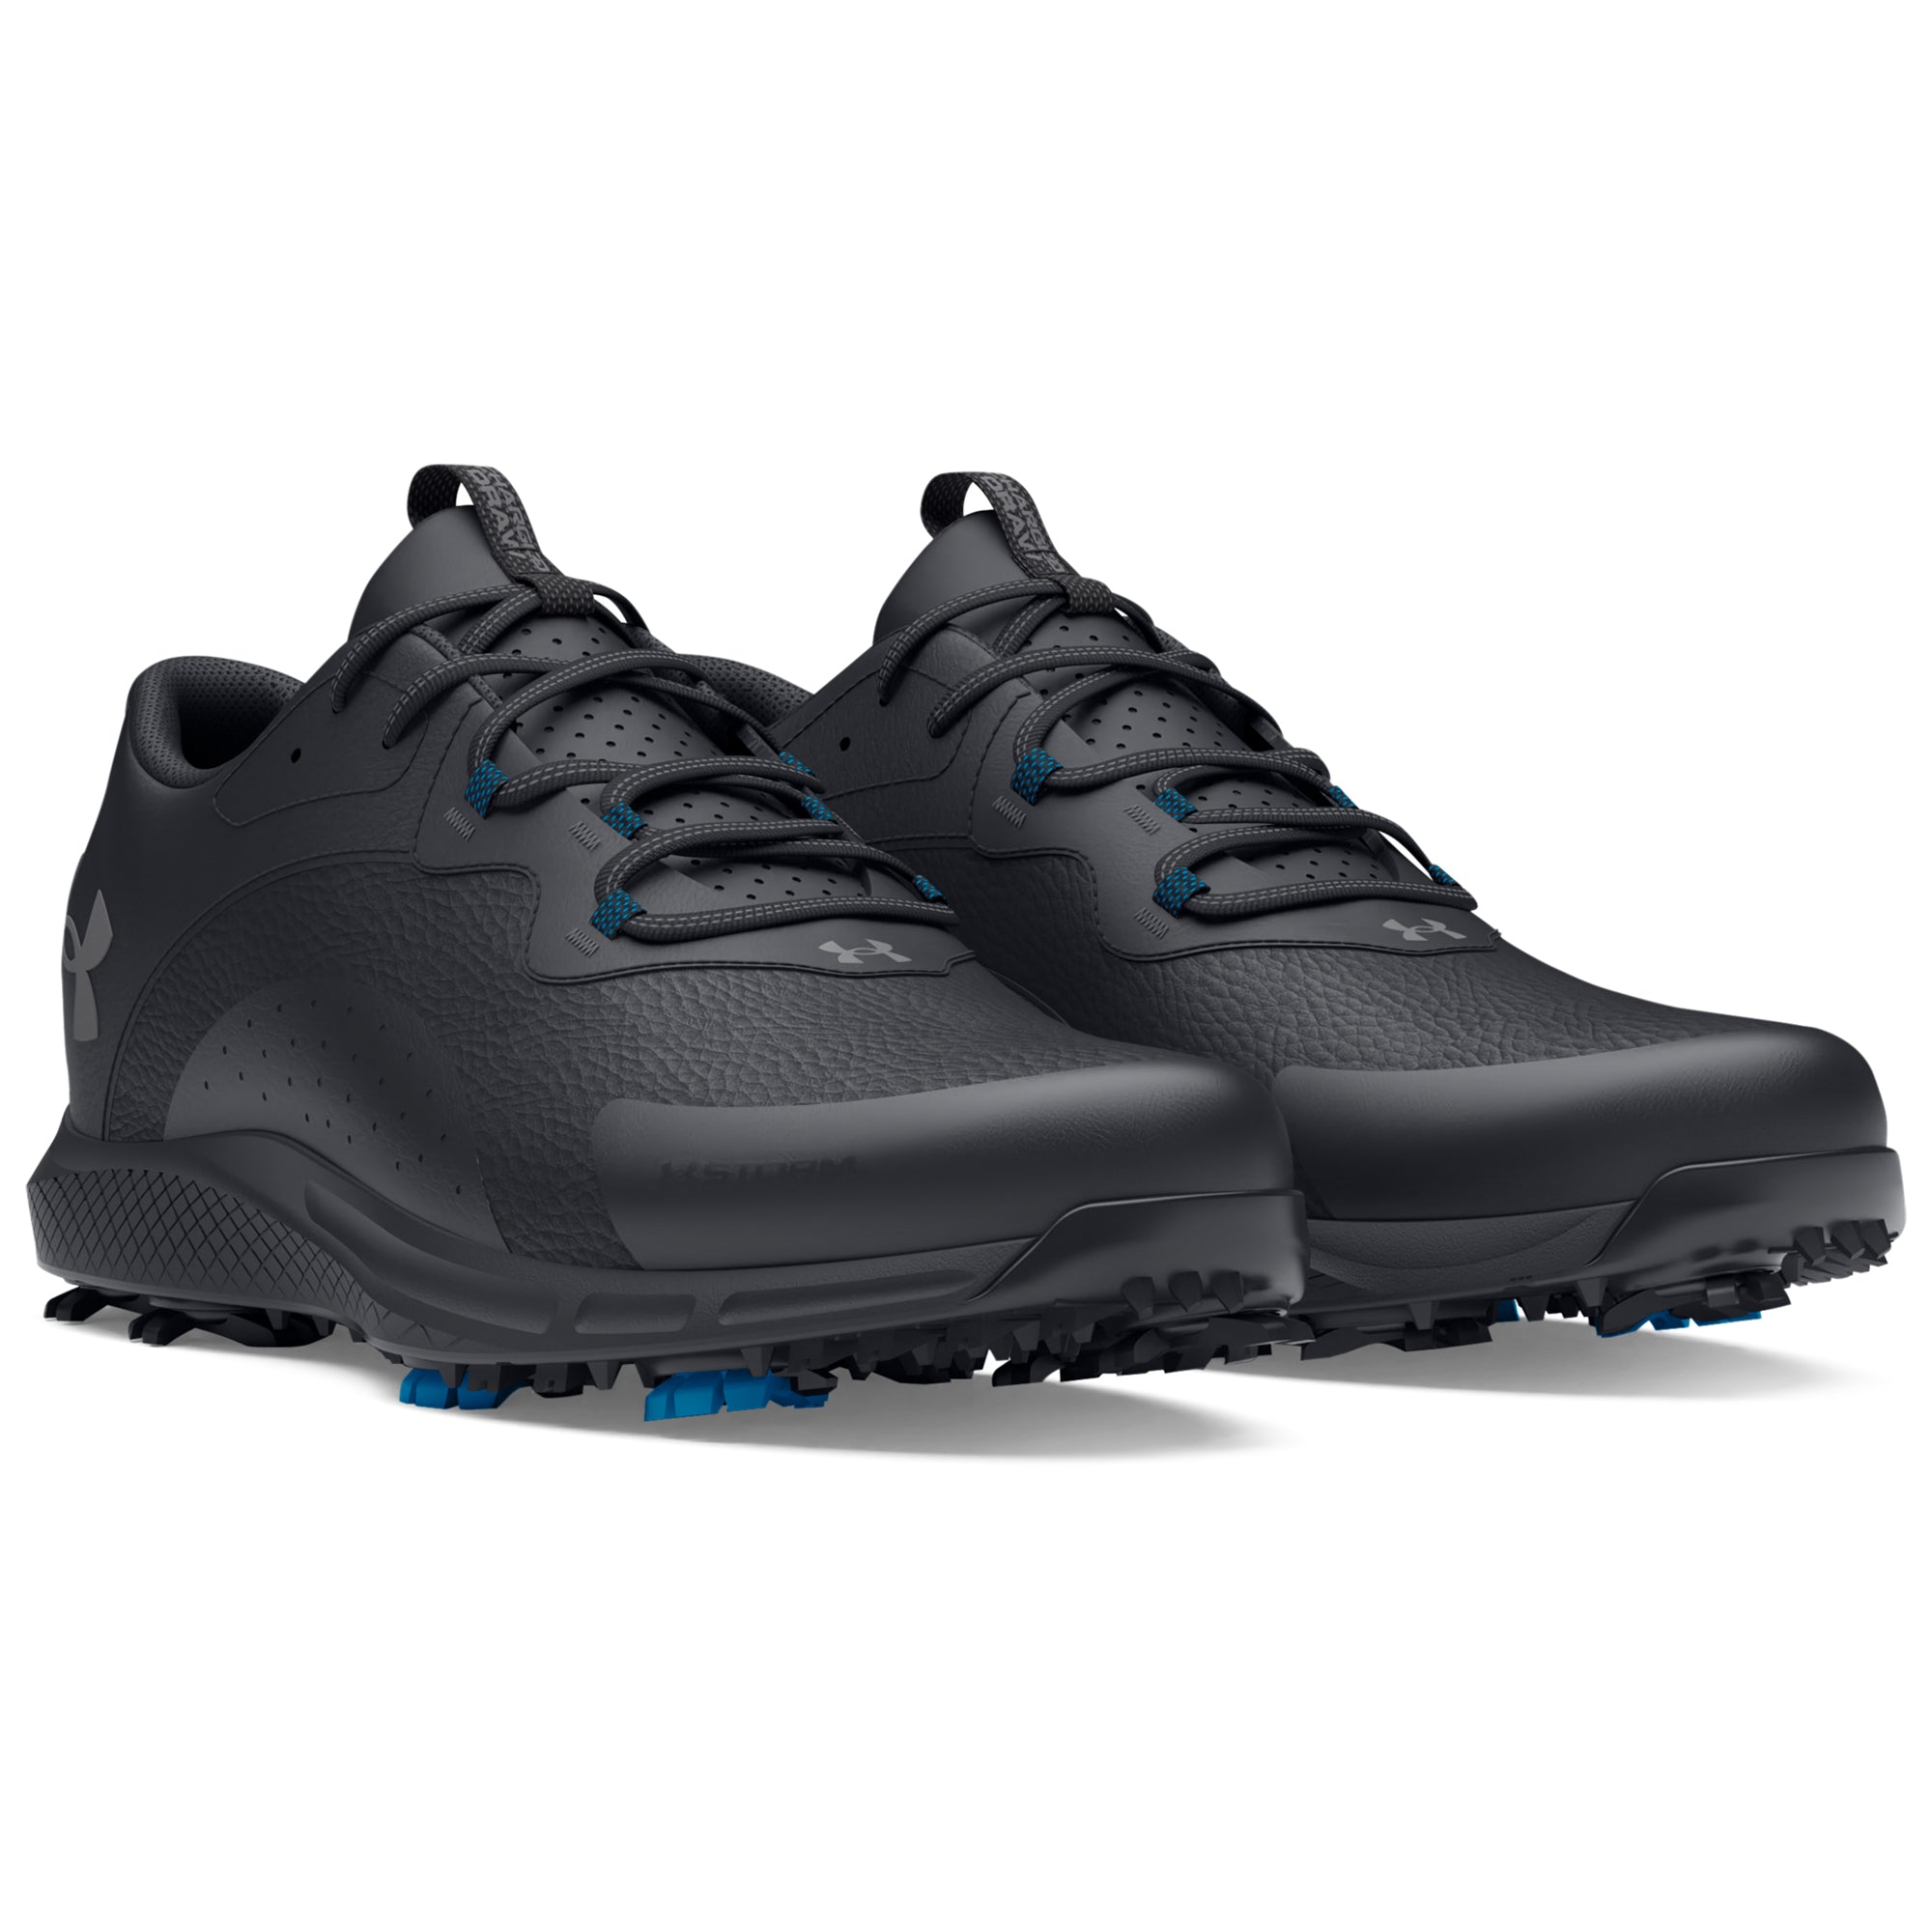 under-armour-charged-draw-2-e-golf-shoes-3026401-black-003